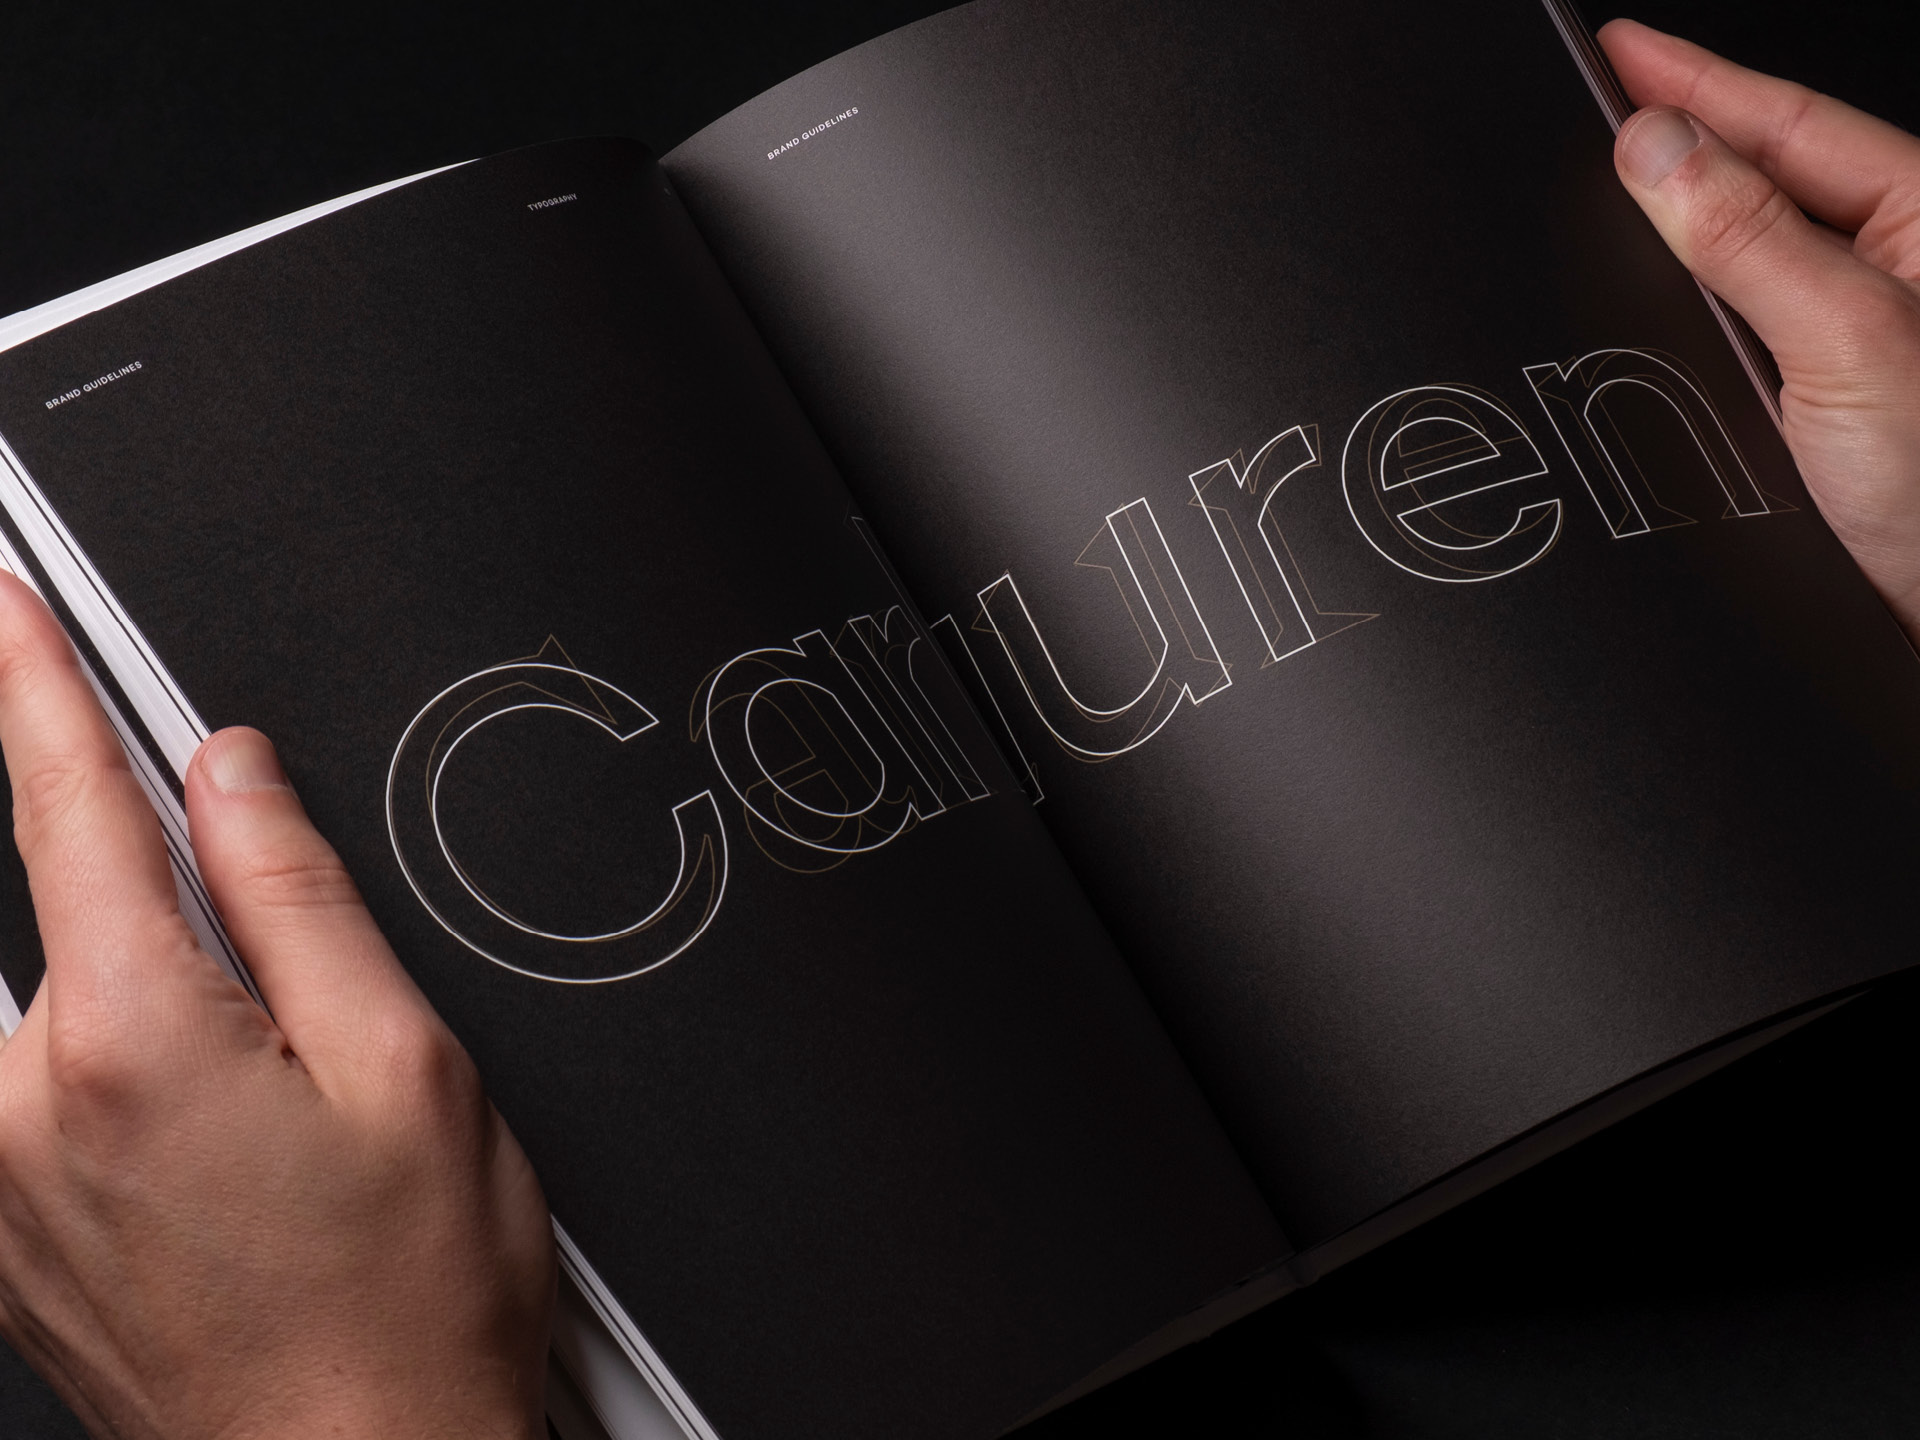 Two hands holding a printed spread from the Carlauren brand guidelines showcasing the two typefaces used in the brands communication